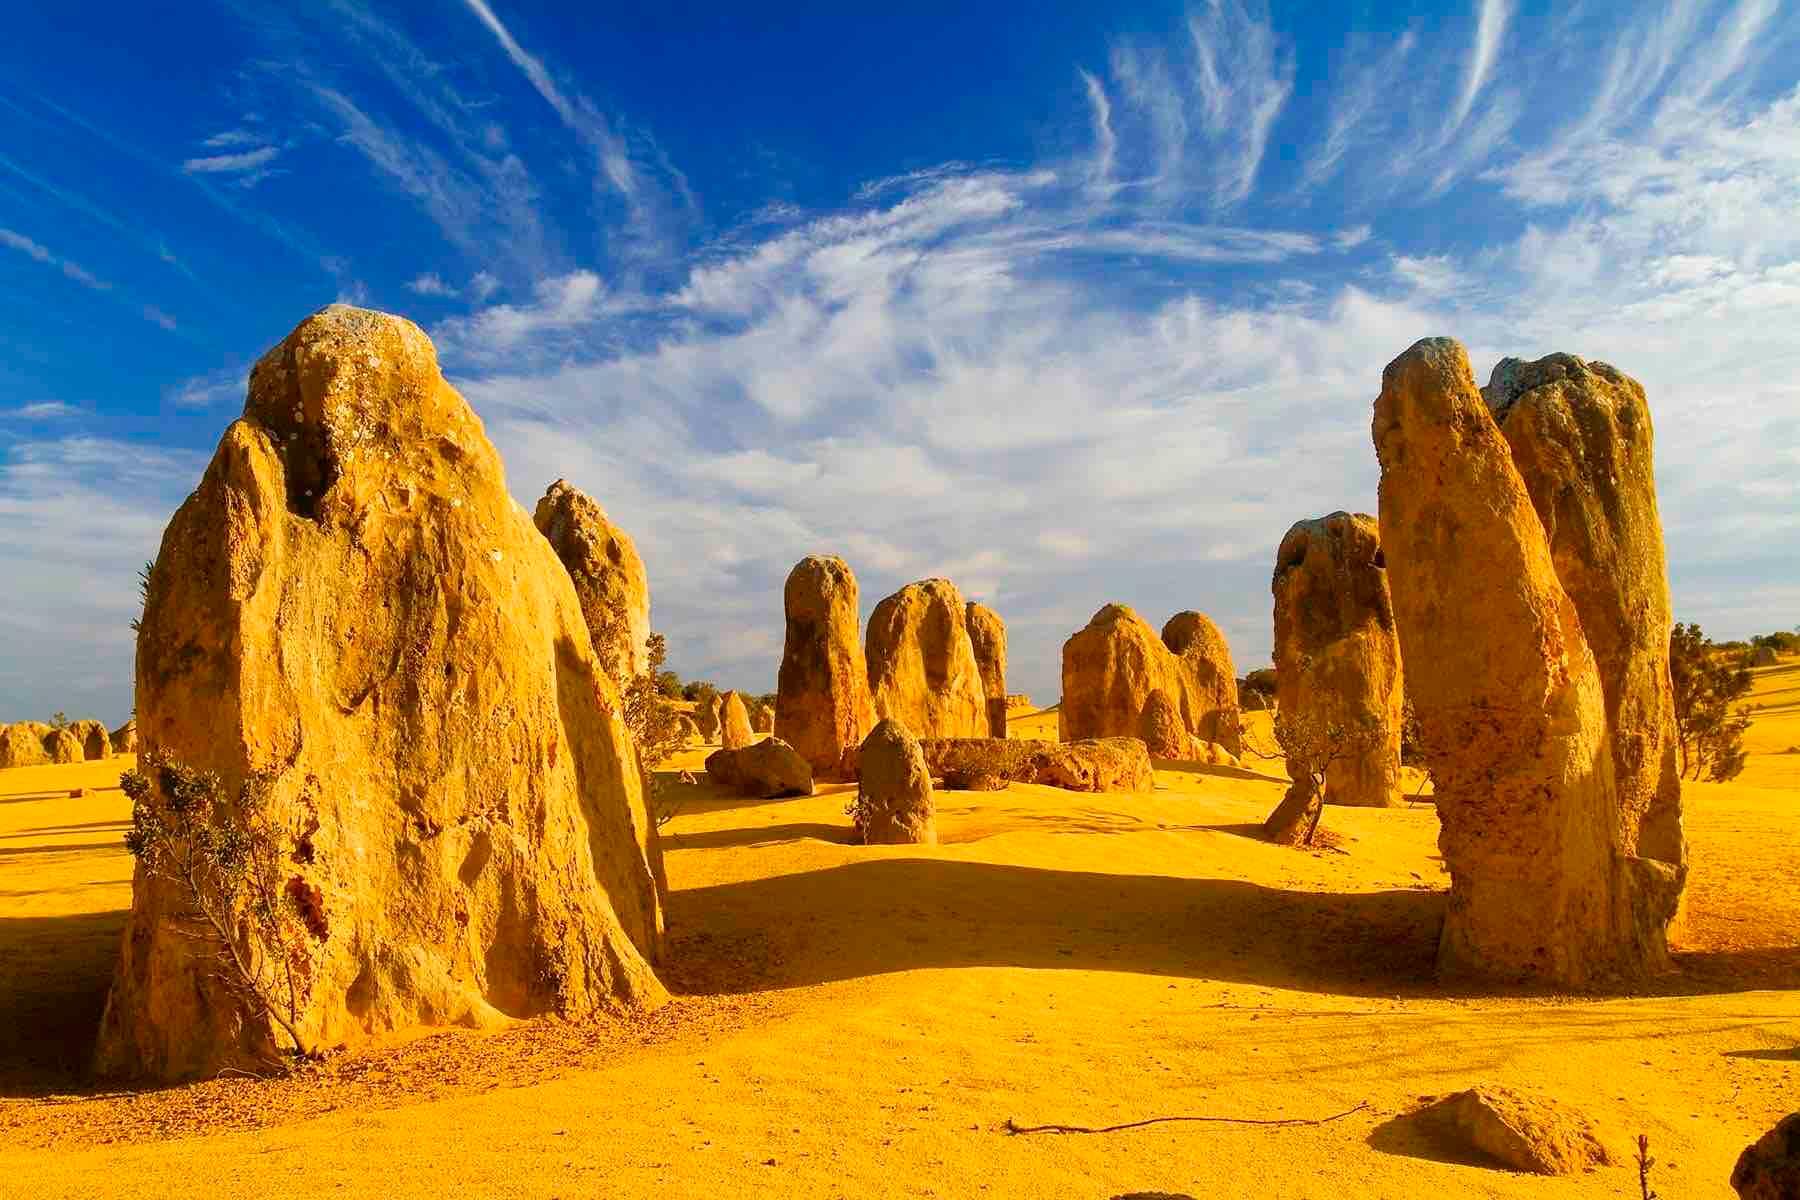 Discover the ancient limestone pillars of the pinnacles